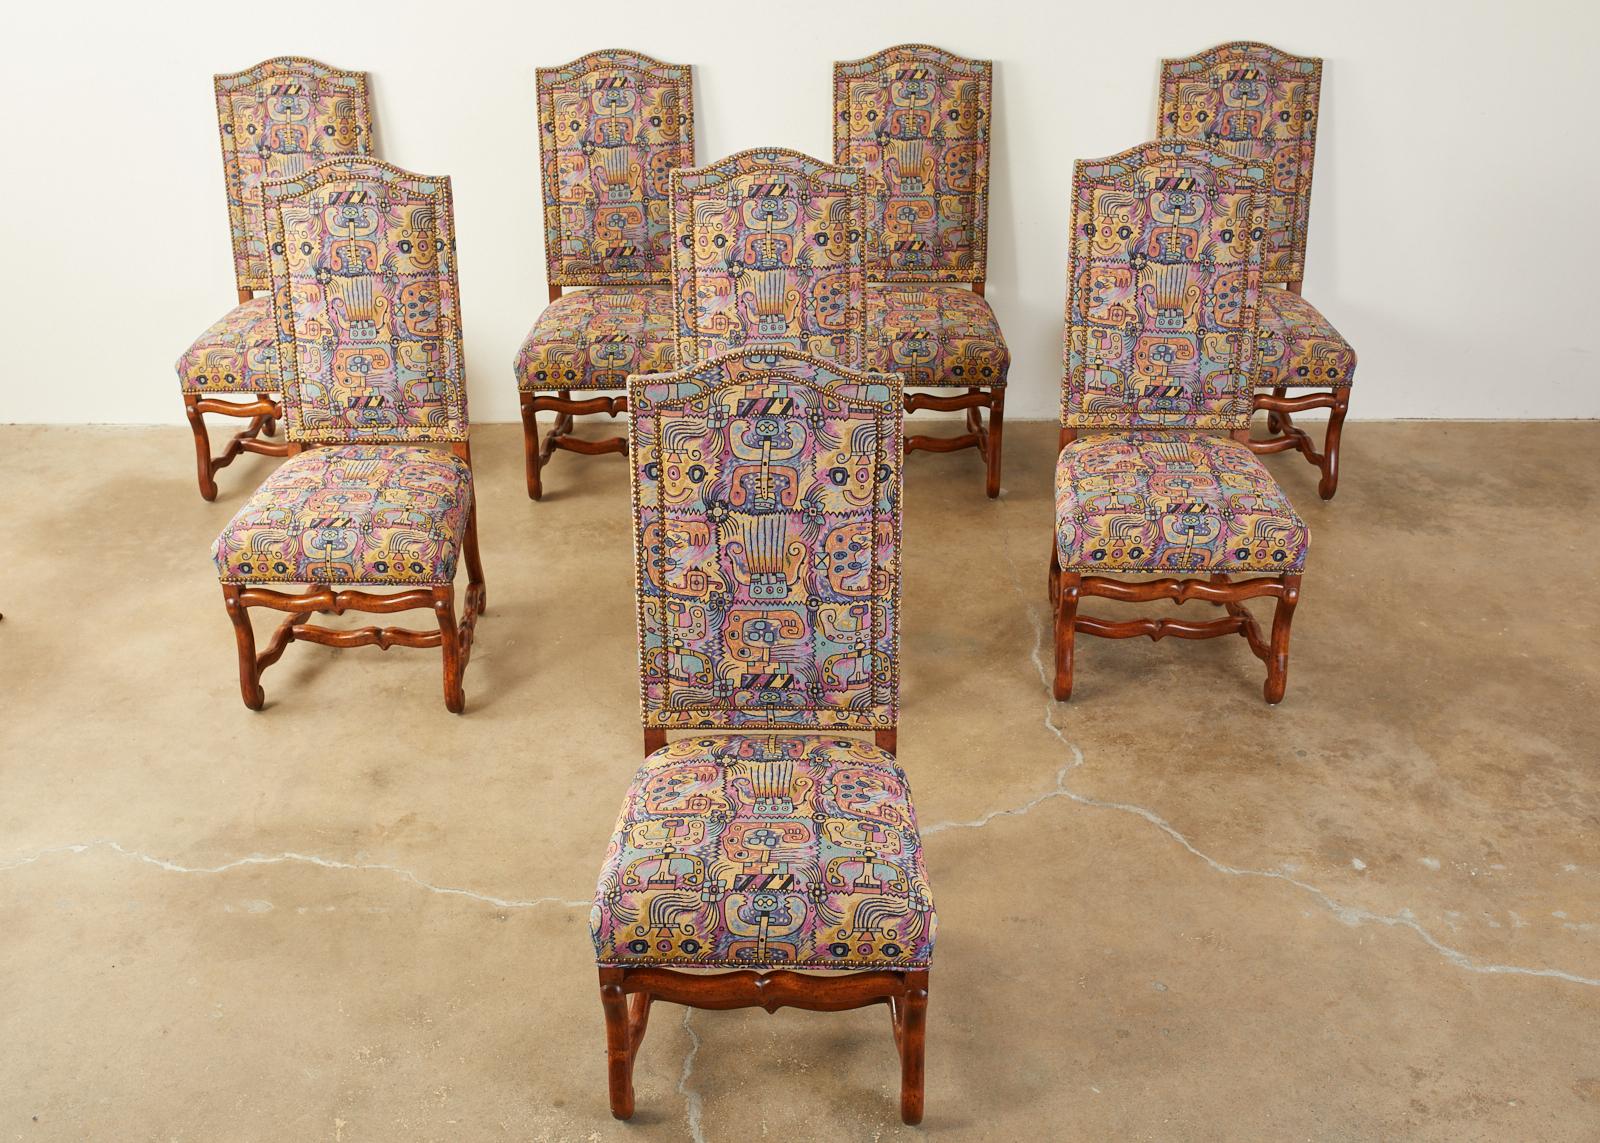 Stunning set of eight French dining chairs featuring a modern redux upholstery with a whimsical abstract expressionist figural artwork design. The chairs are made in the Louis XIV Os de Mouton taste crafted from rich walnut. The modernist fabric is